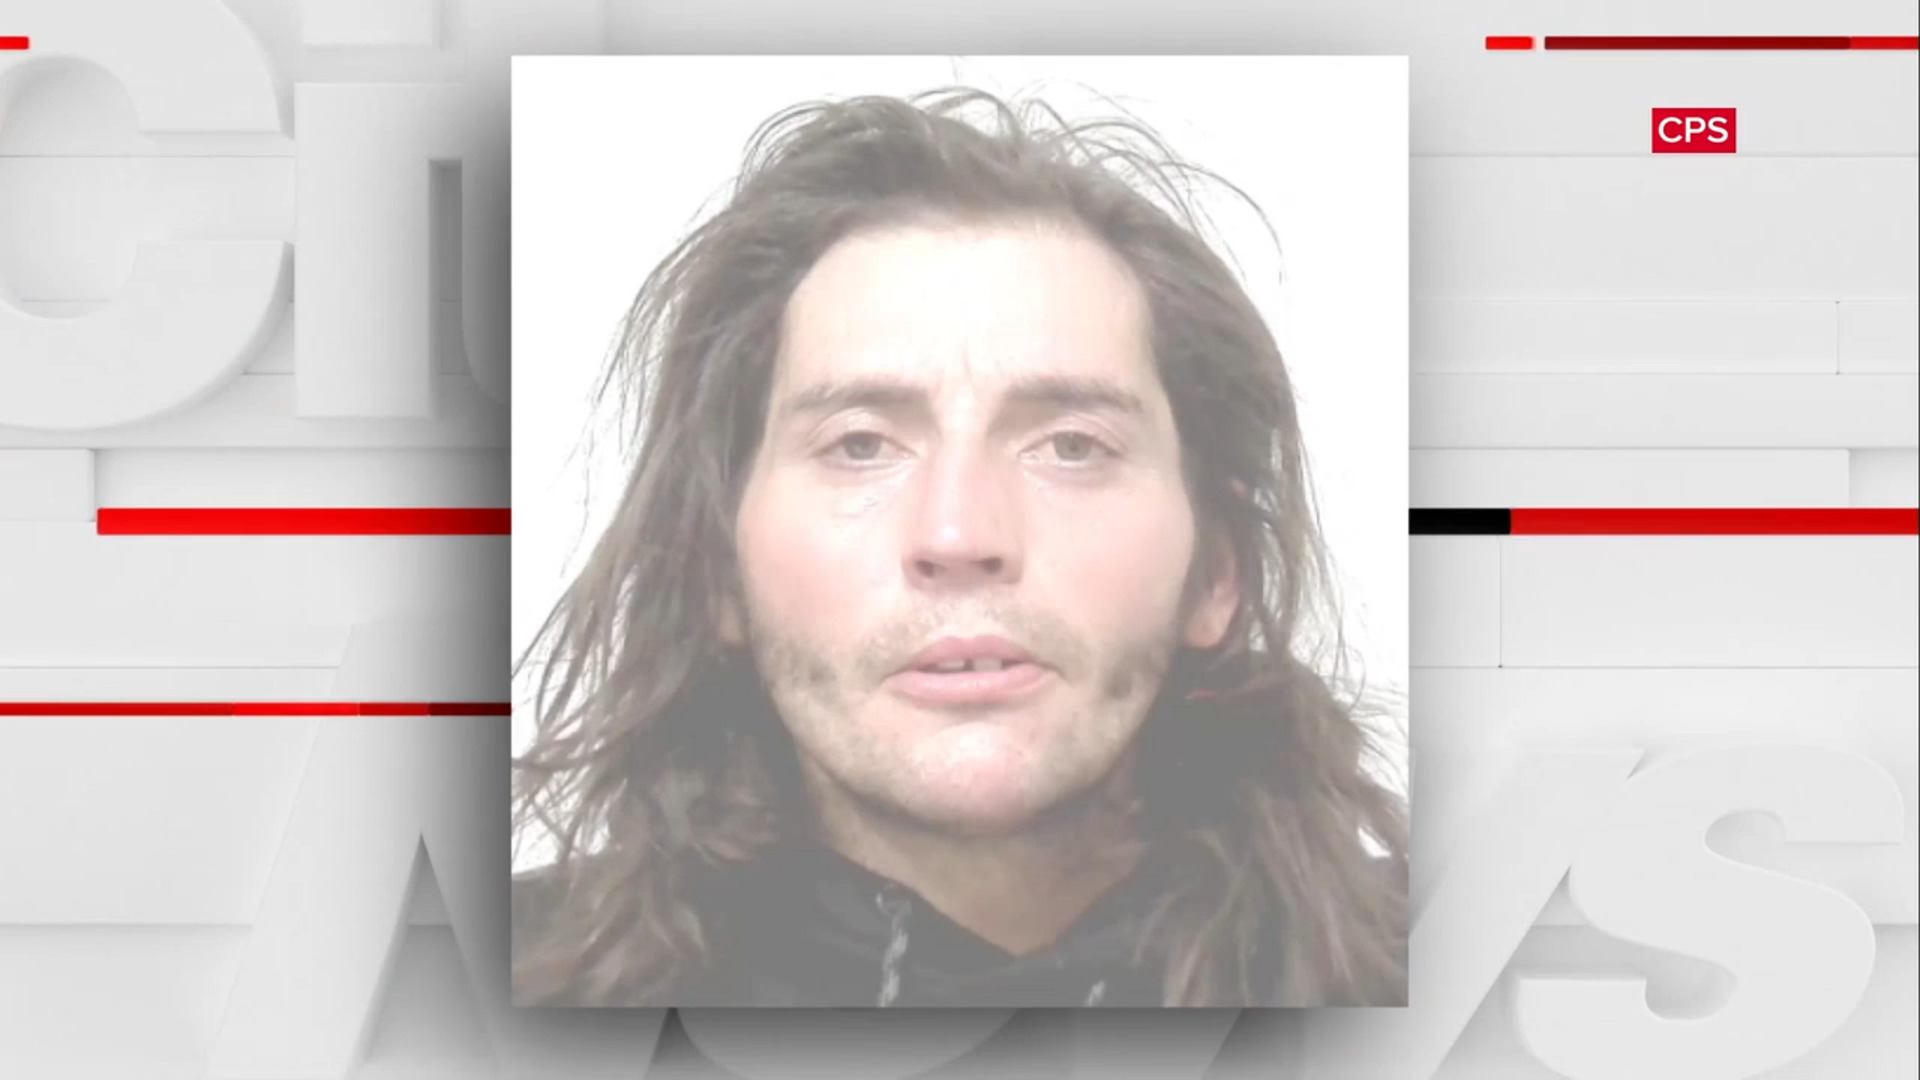 Calgary police looking for man wanted on wire theft charges